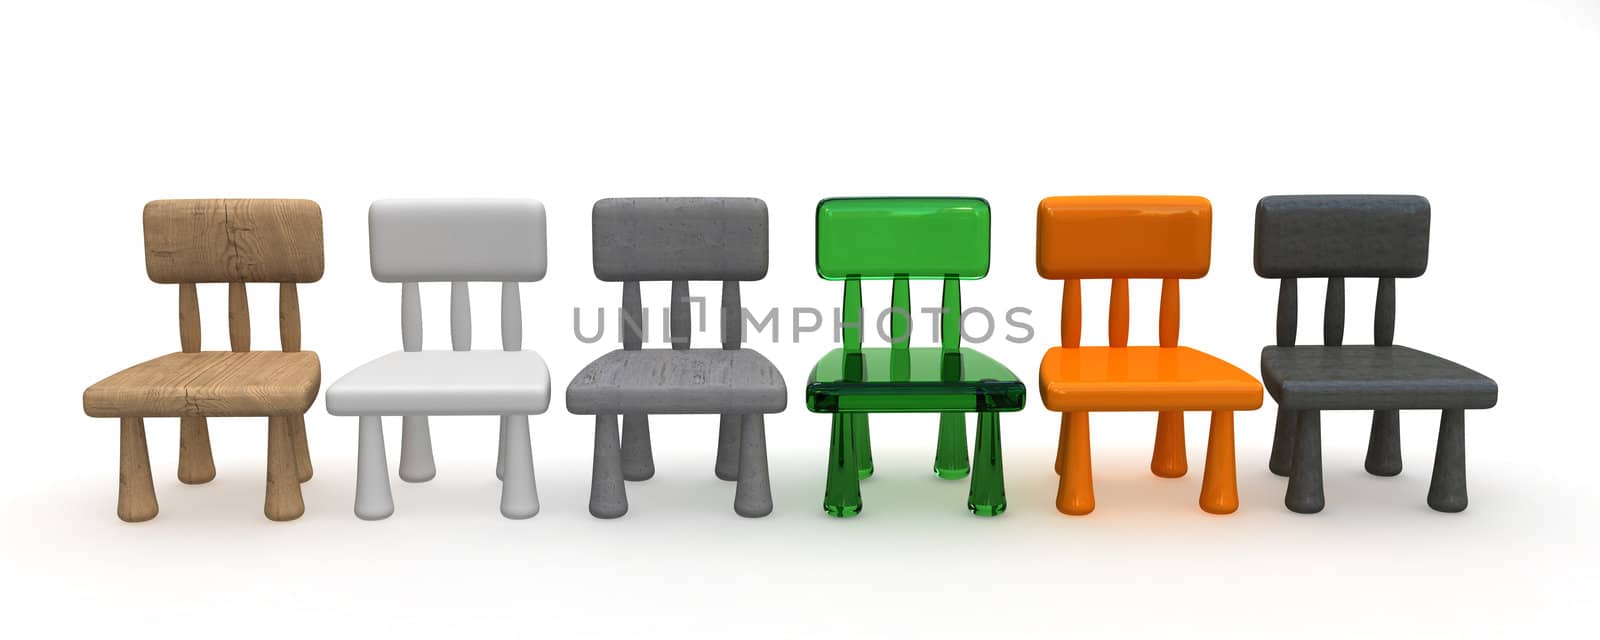 Toy chairs in different materials